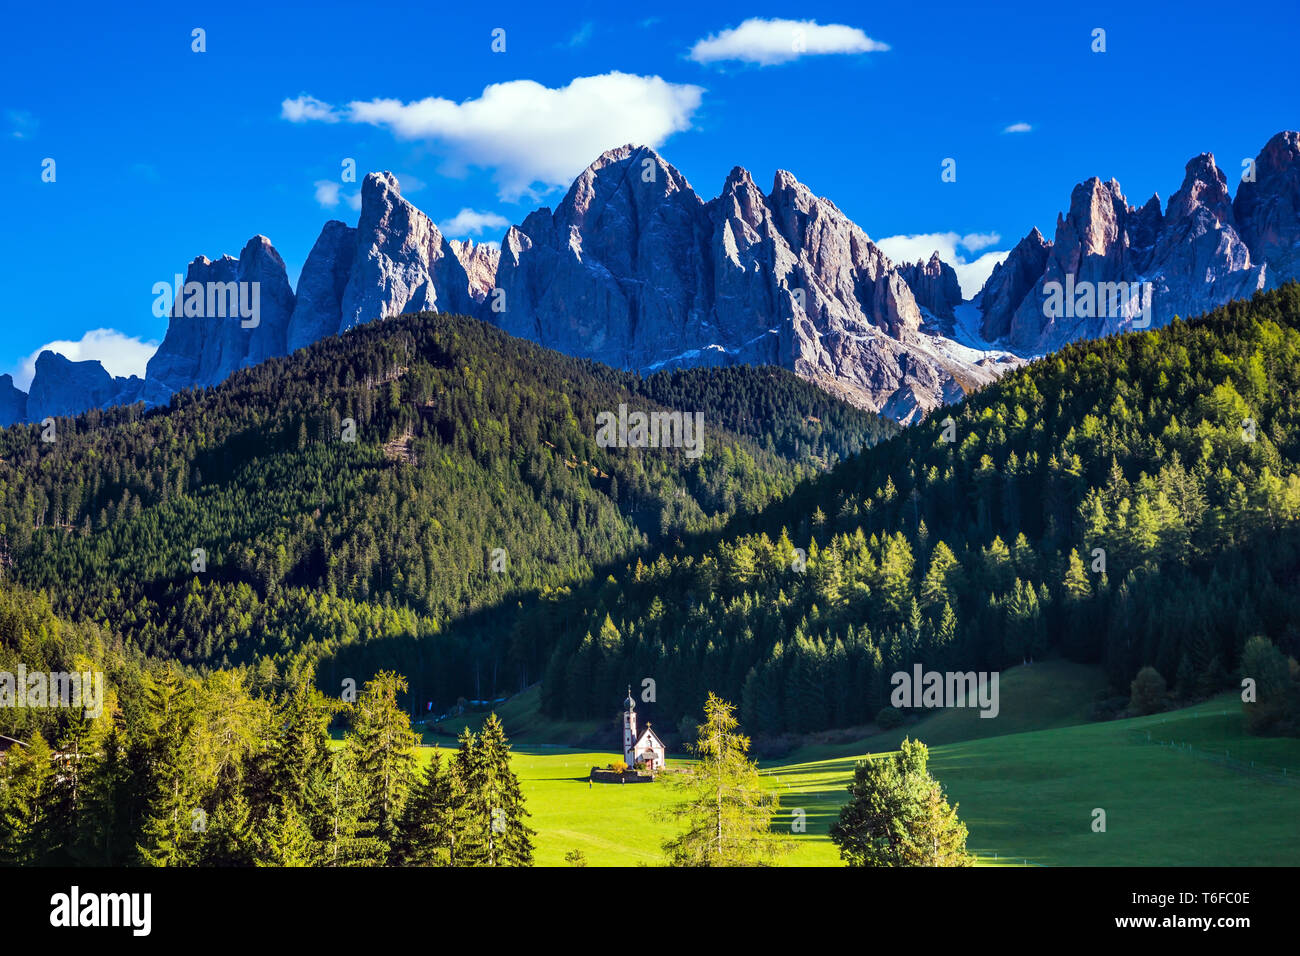 Rocky peaks and forested mountains Stock Photo